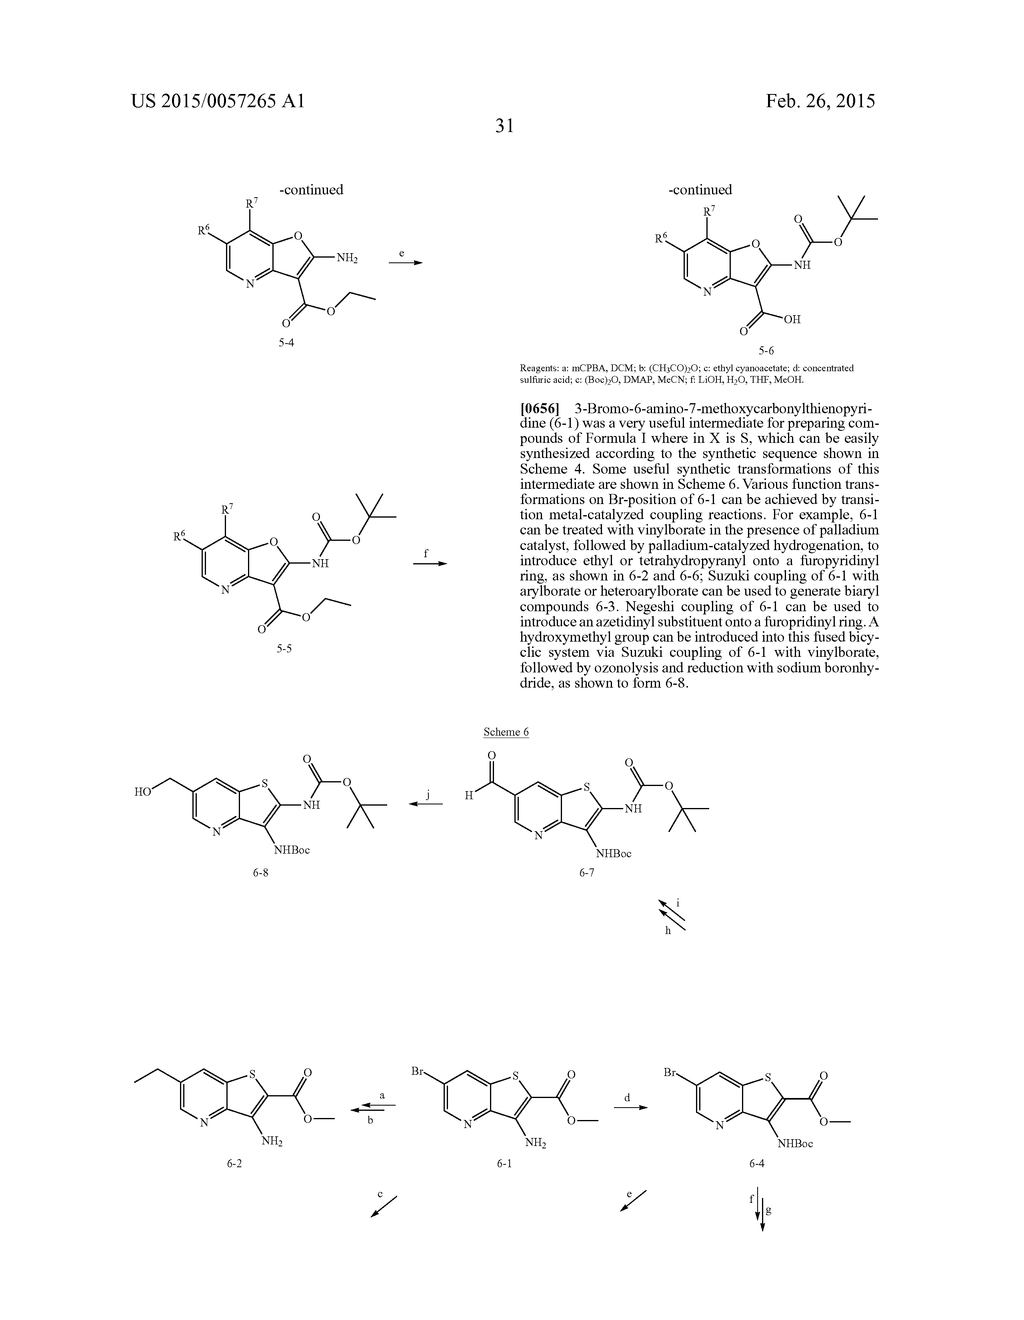 FURO- AND THIENO-PYRIDINE CARBOXAMIDE COMPOUNDS USEFUL AS PIM KINASE     INHIBITORS - diagram, schematic, and image 32